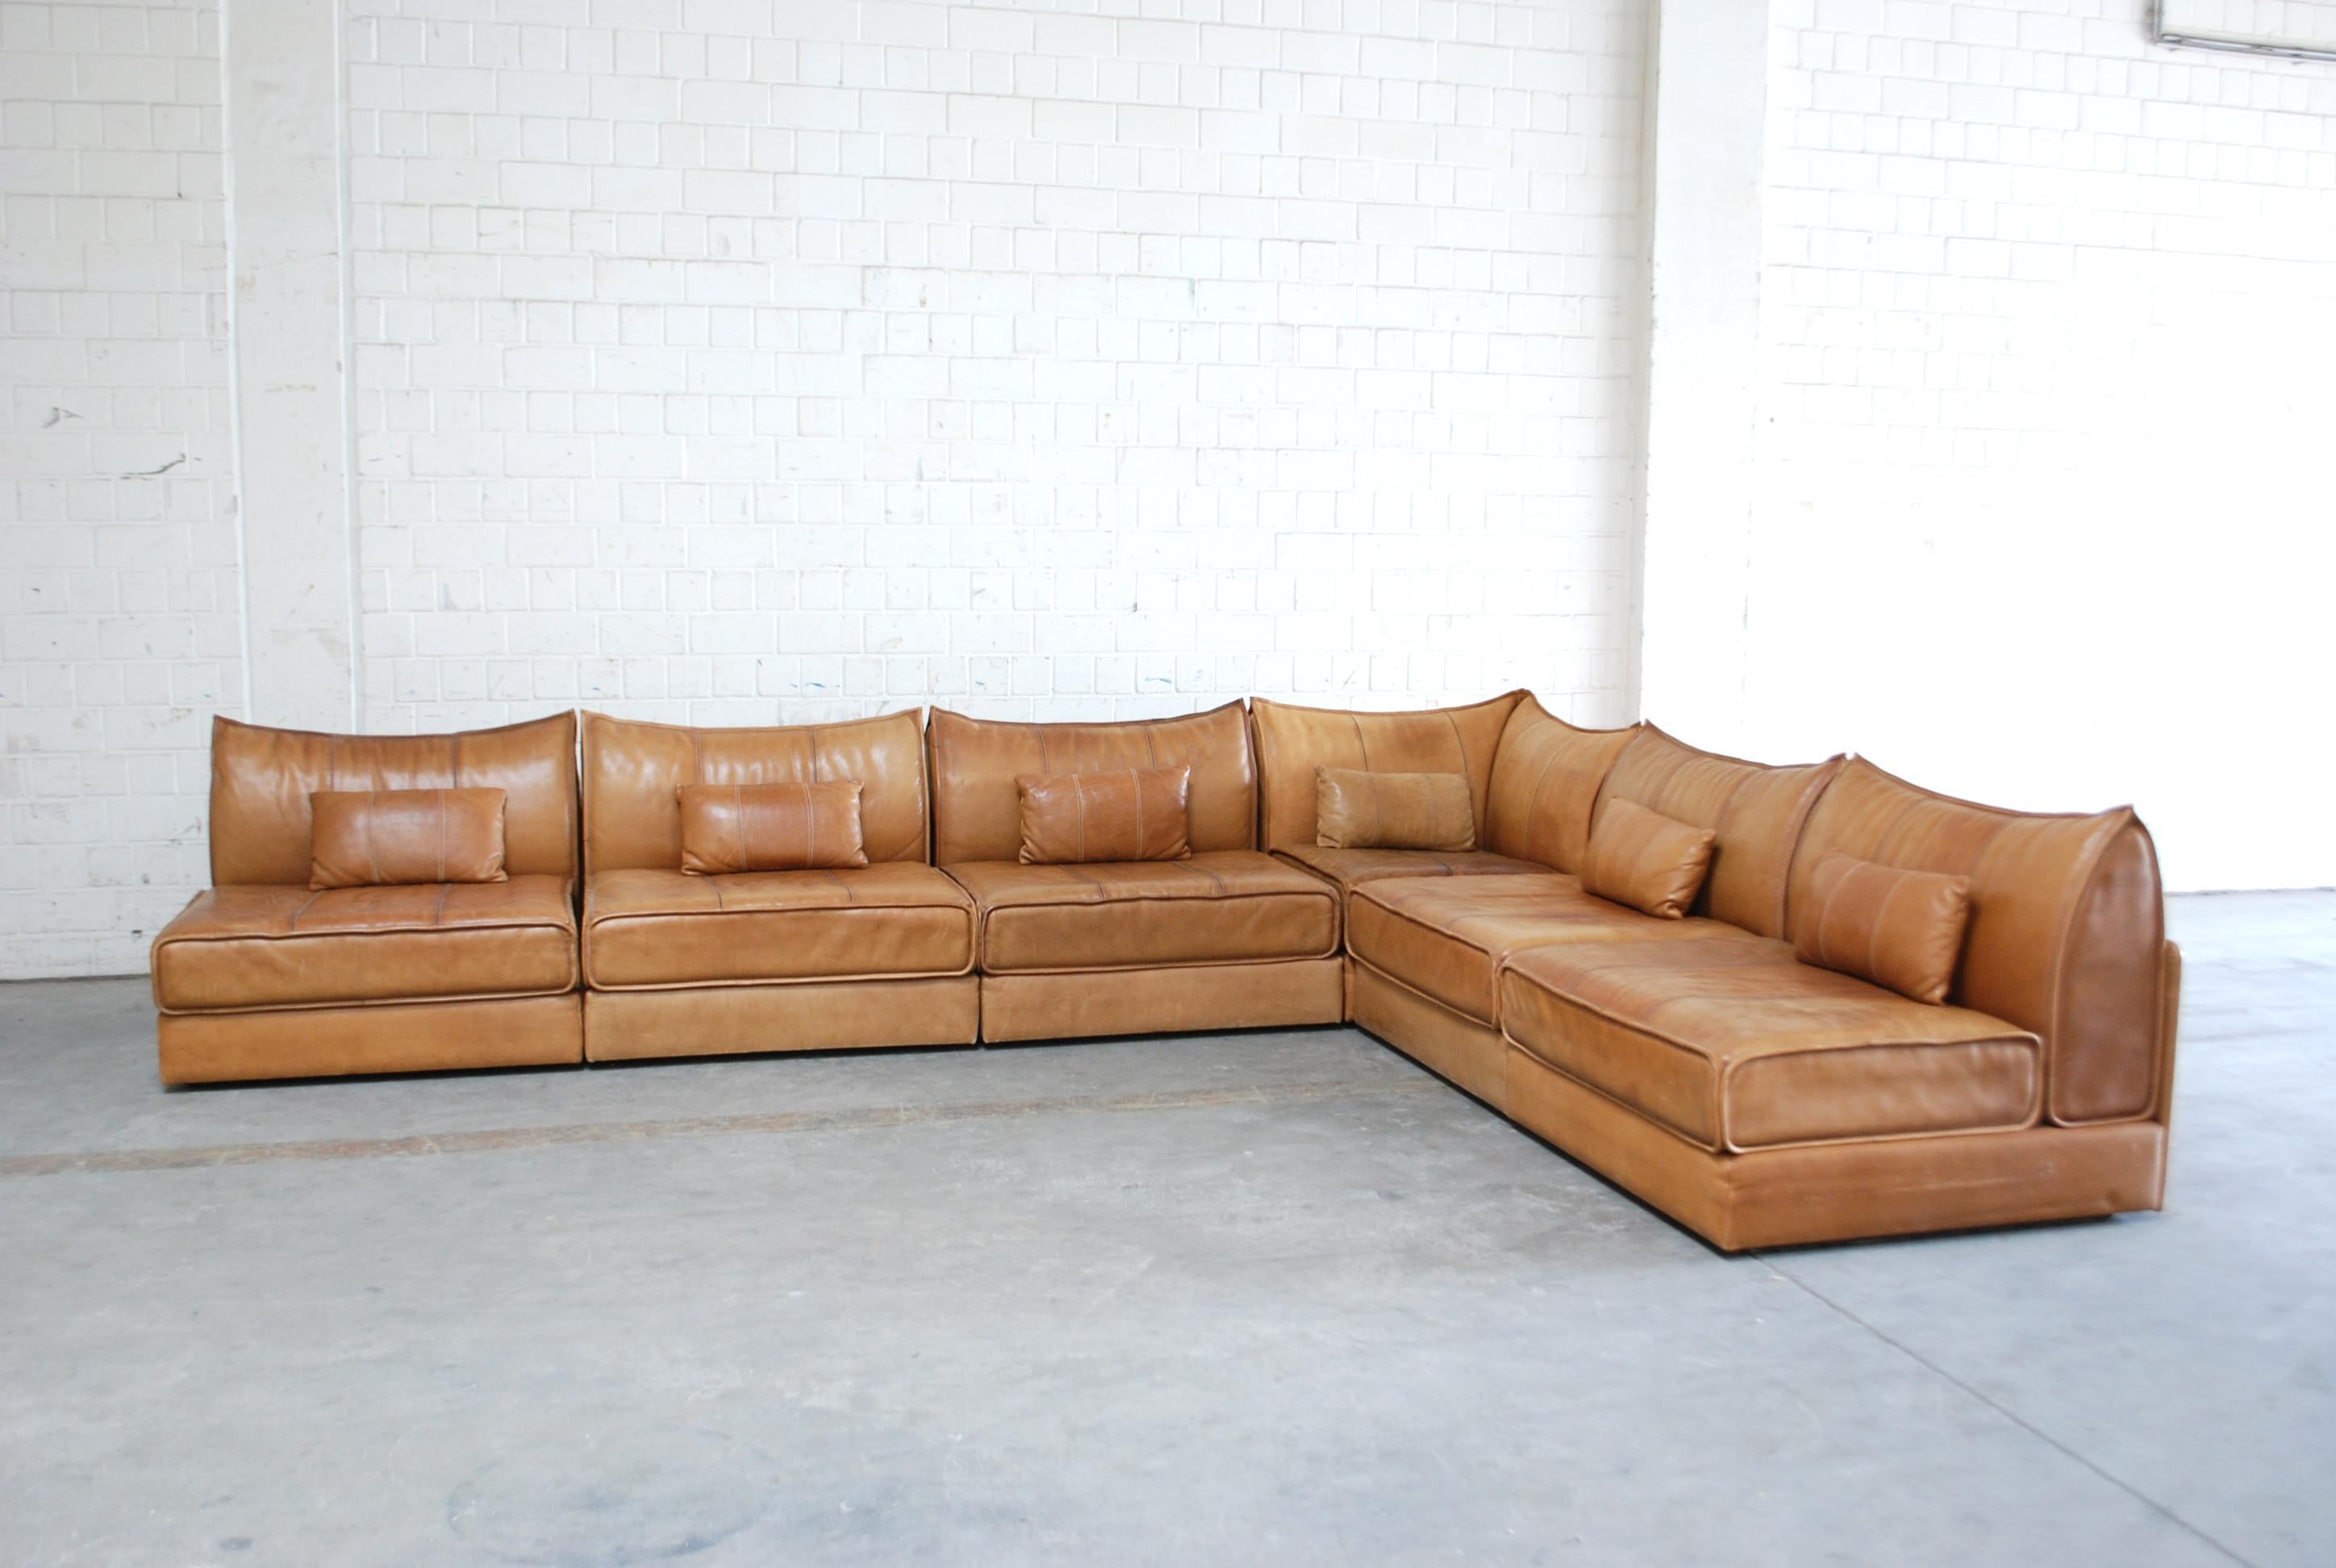 De Sede Ds 19 modul sofa. Thick cognac leather as known as DS military leather. Unique colour and patina.
It consists 6 elements including 1 corner and 5 single elements and 6 small pillows. Rare model by De Sede.
De Sede is known for best leather